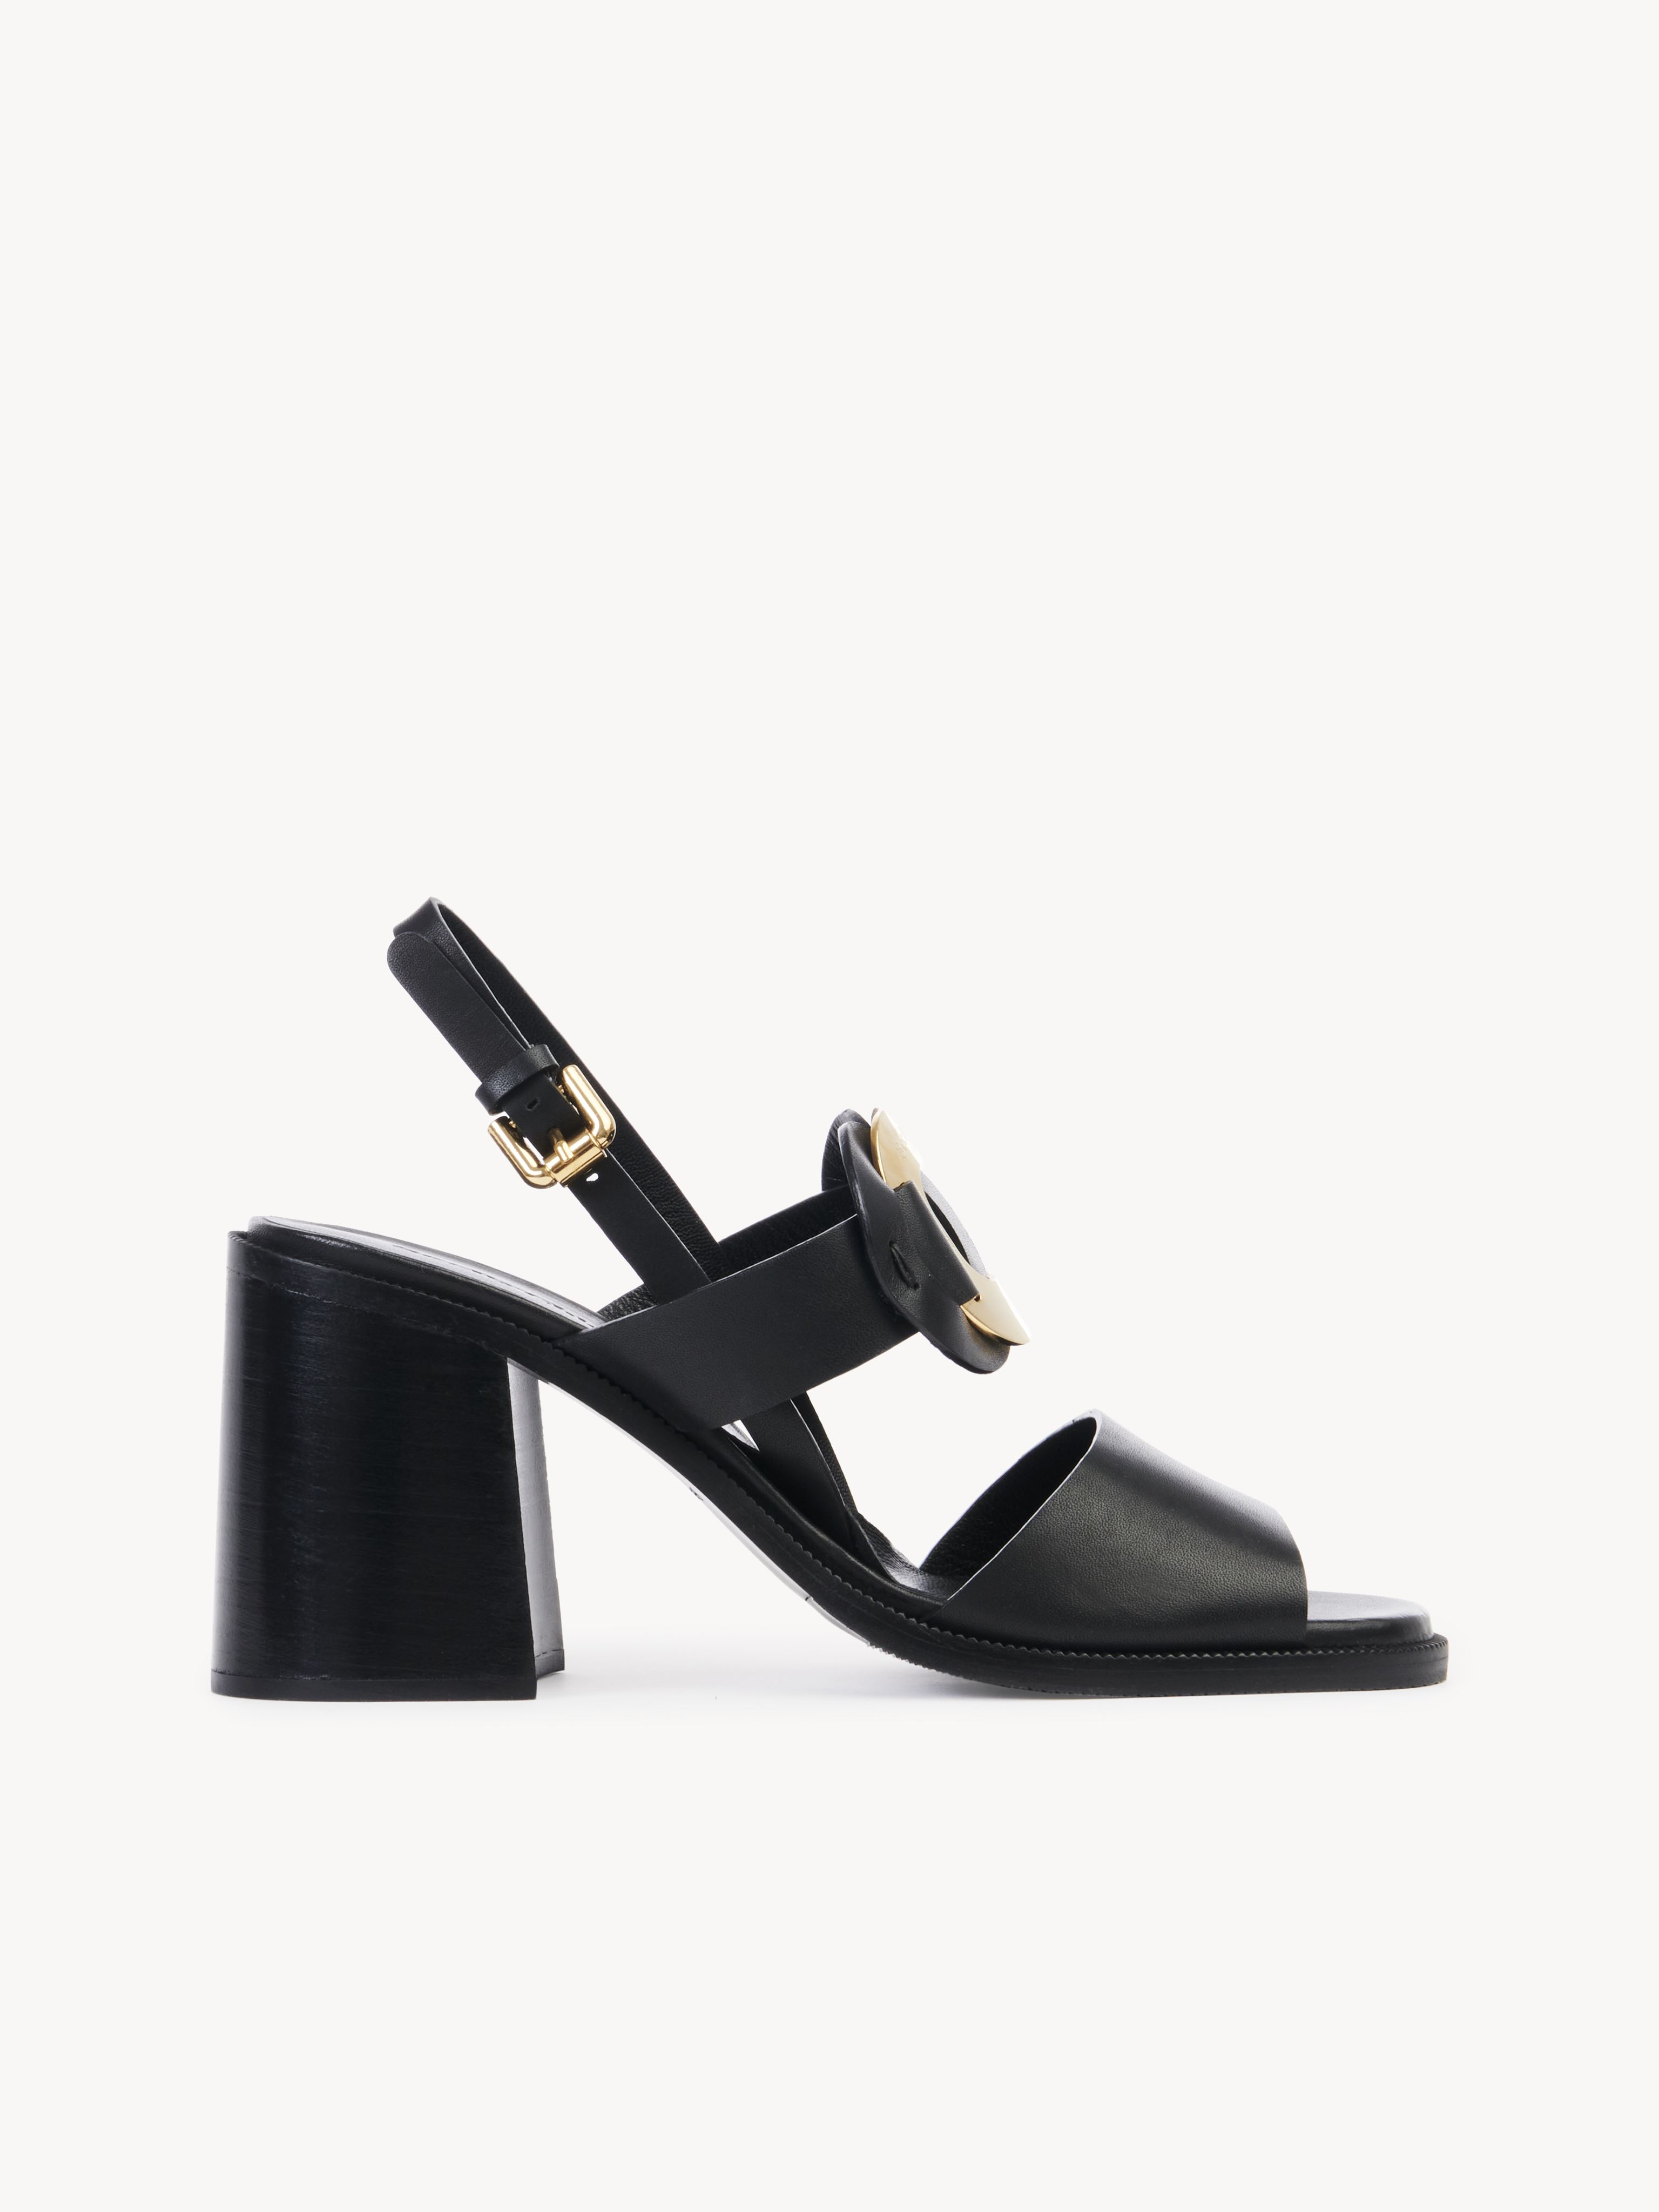 SEE BY CHLOÉ CHANY HIGH-HEEL SANDAL BLACK SIZE 6 100% CALF-SKIN LEATHER